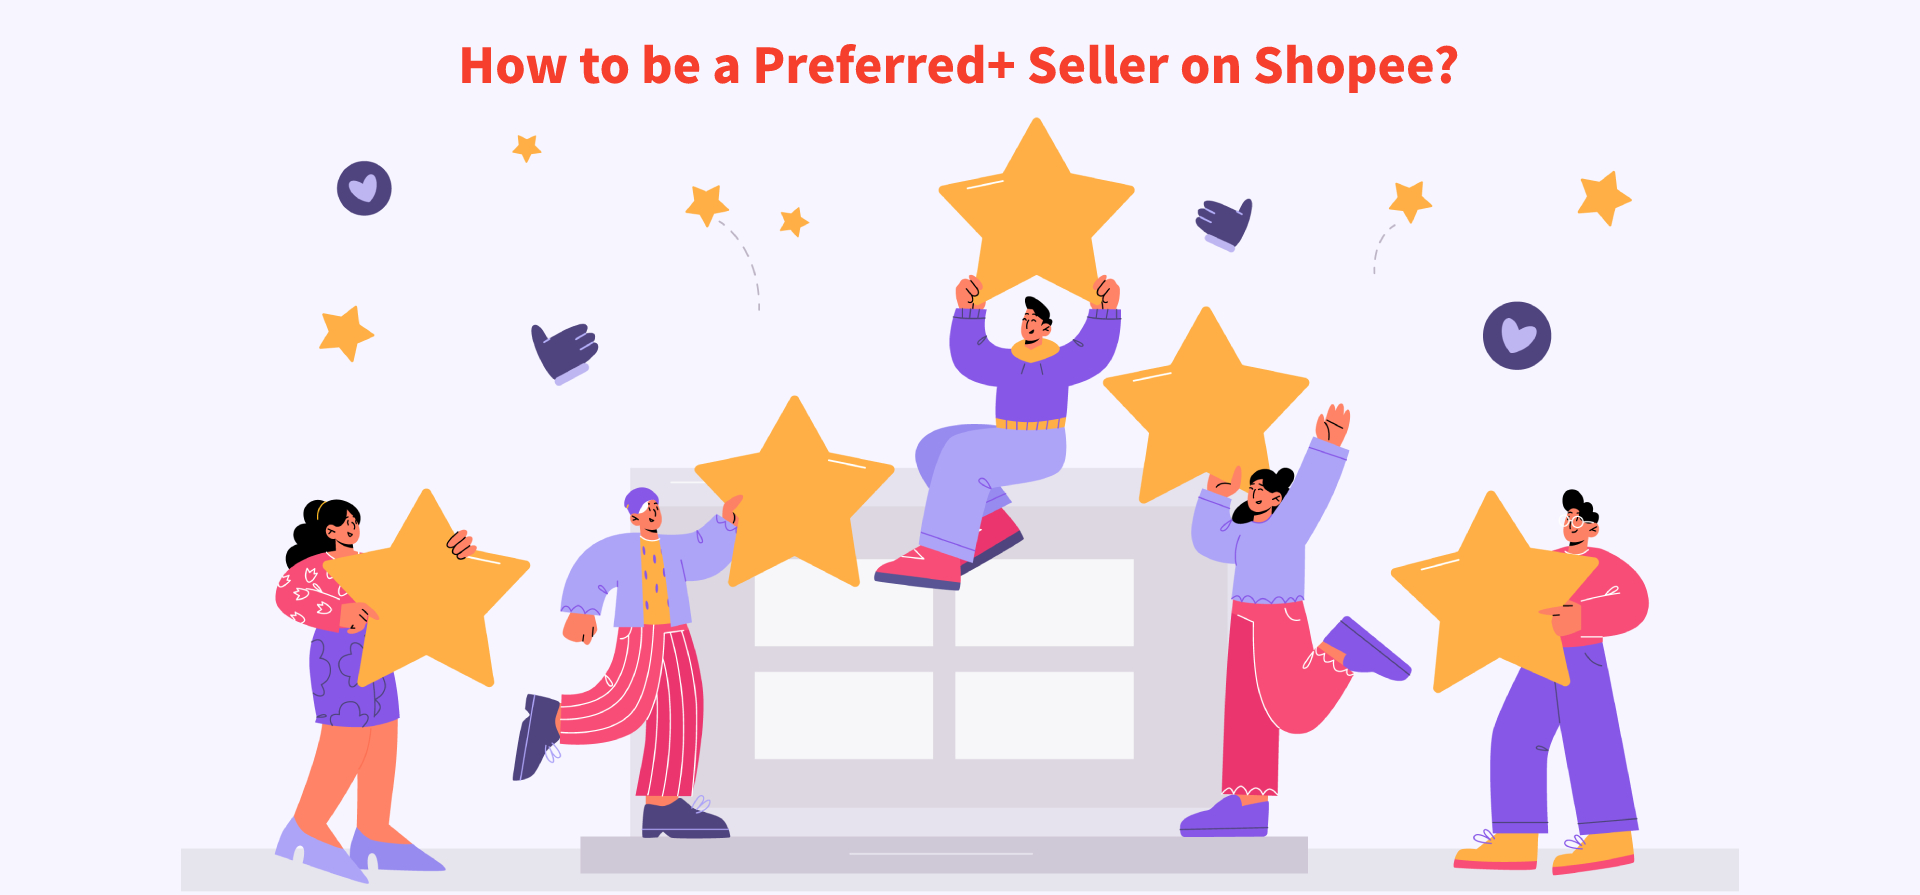 How to be a Preferred+ Seller on Shopee?